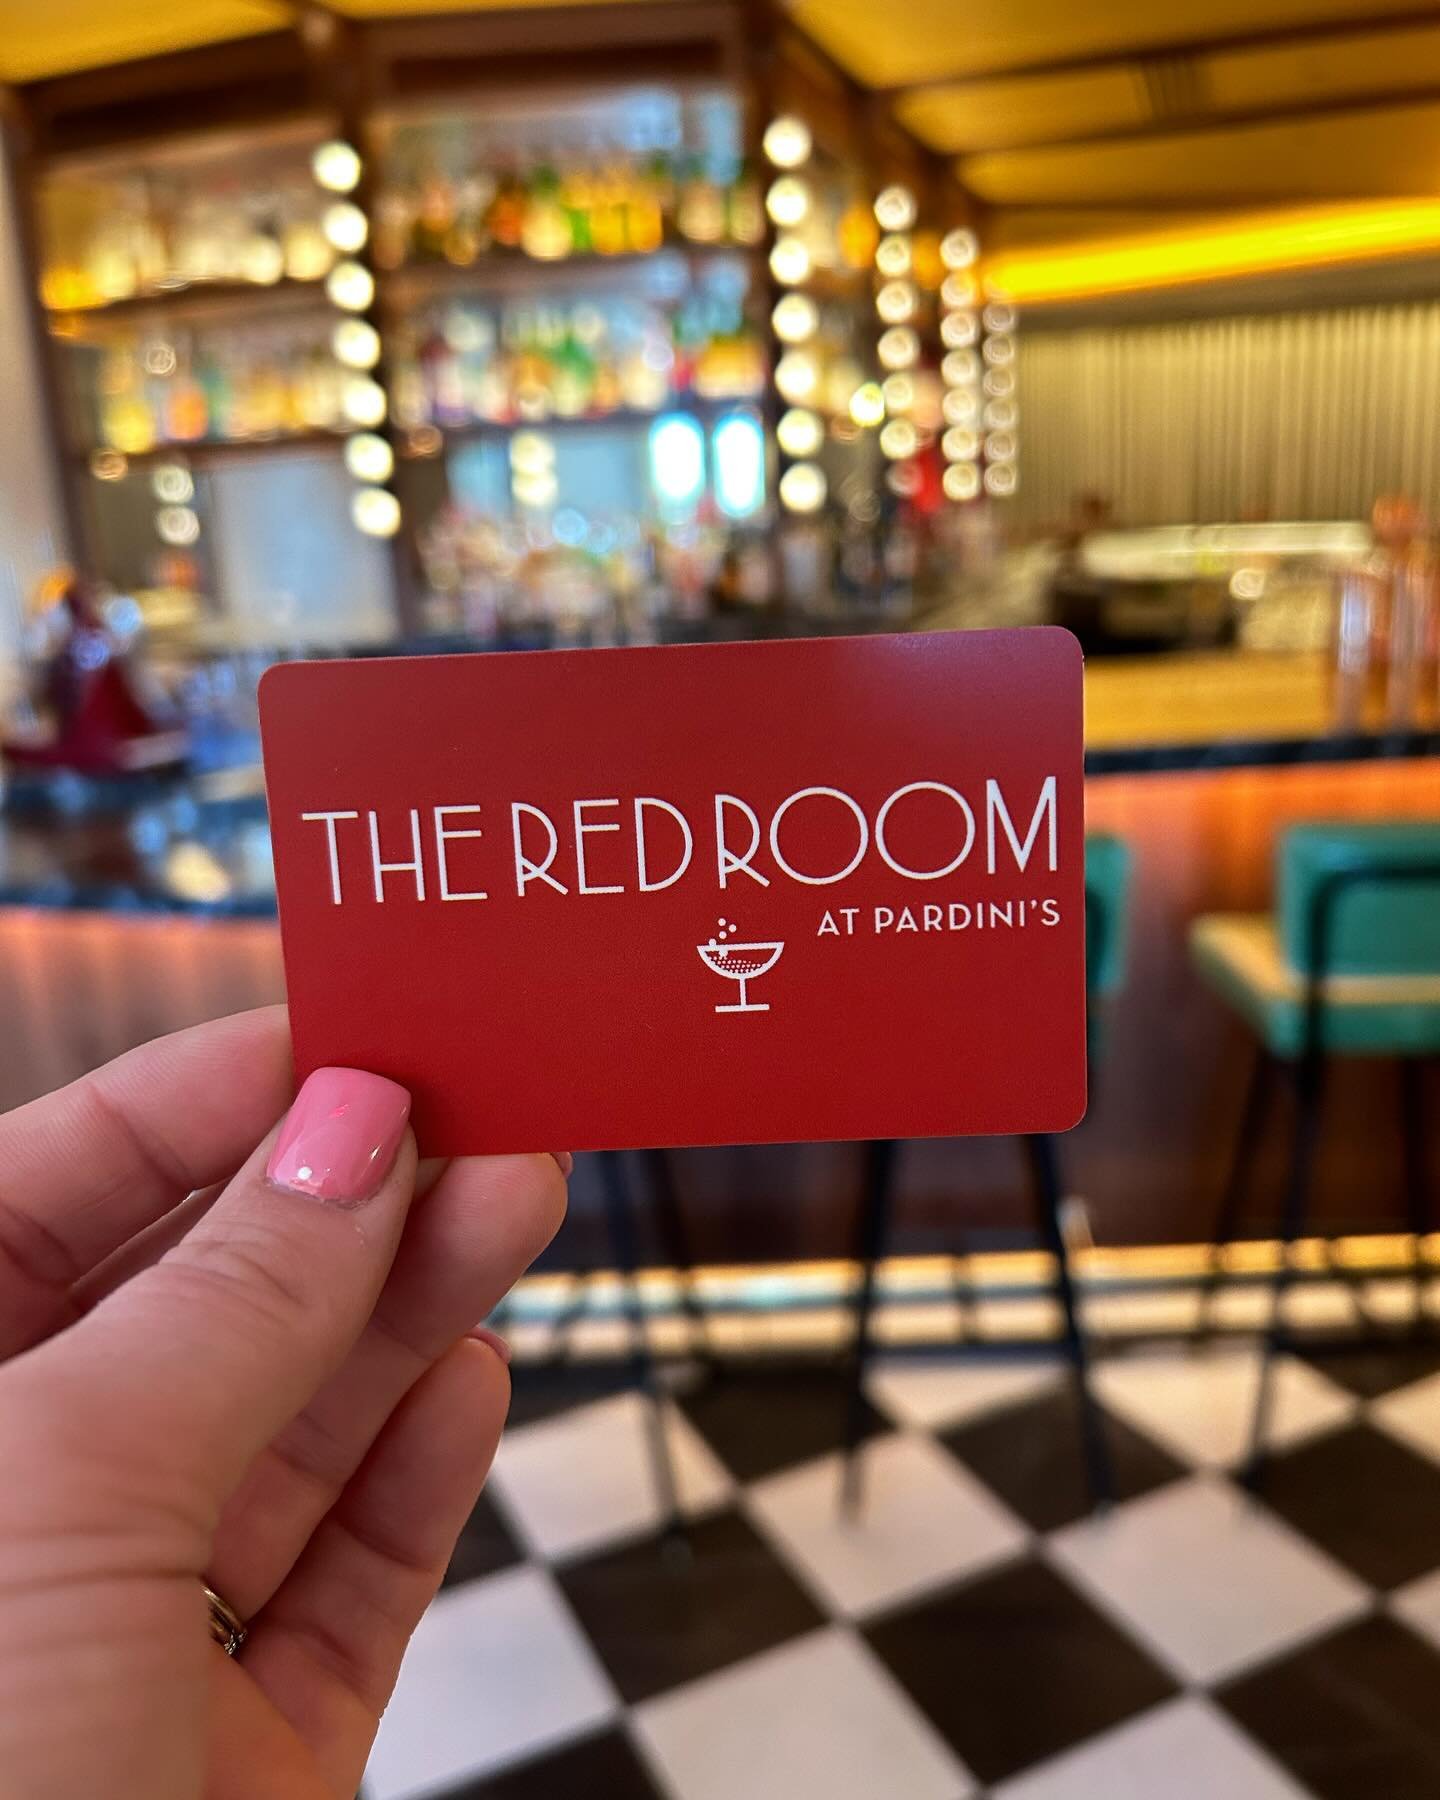 ‼️GIVEAWAY ALERT‼️

A little thank you for being here! Enter for a chance to win a $50 eGift Card to spend at your next visit! 

To Enter:

1. Follow @redroomfresno
2. Like this post
3. Tag 3 friends 

Winners will be announced at random on Monday 4/